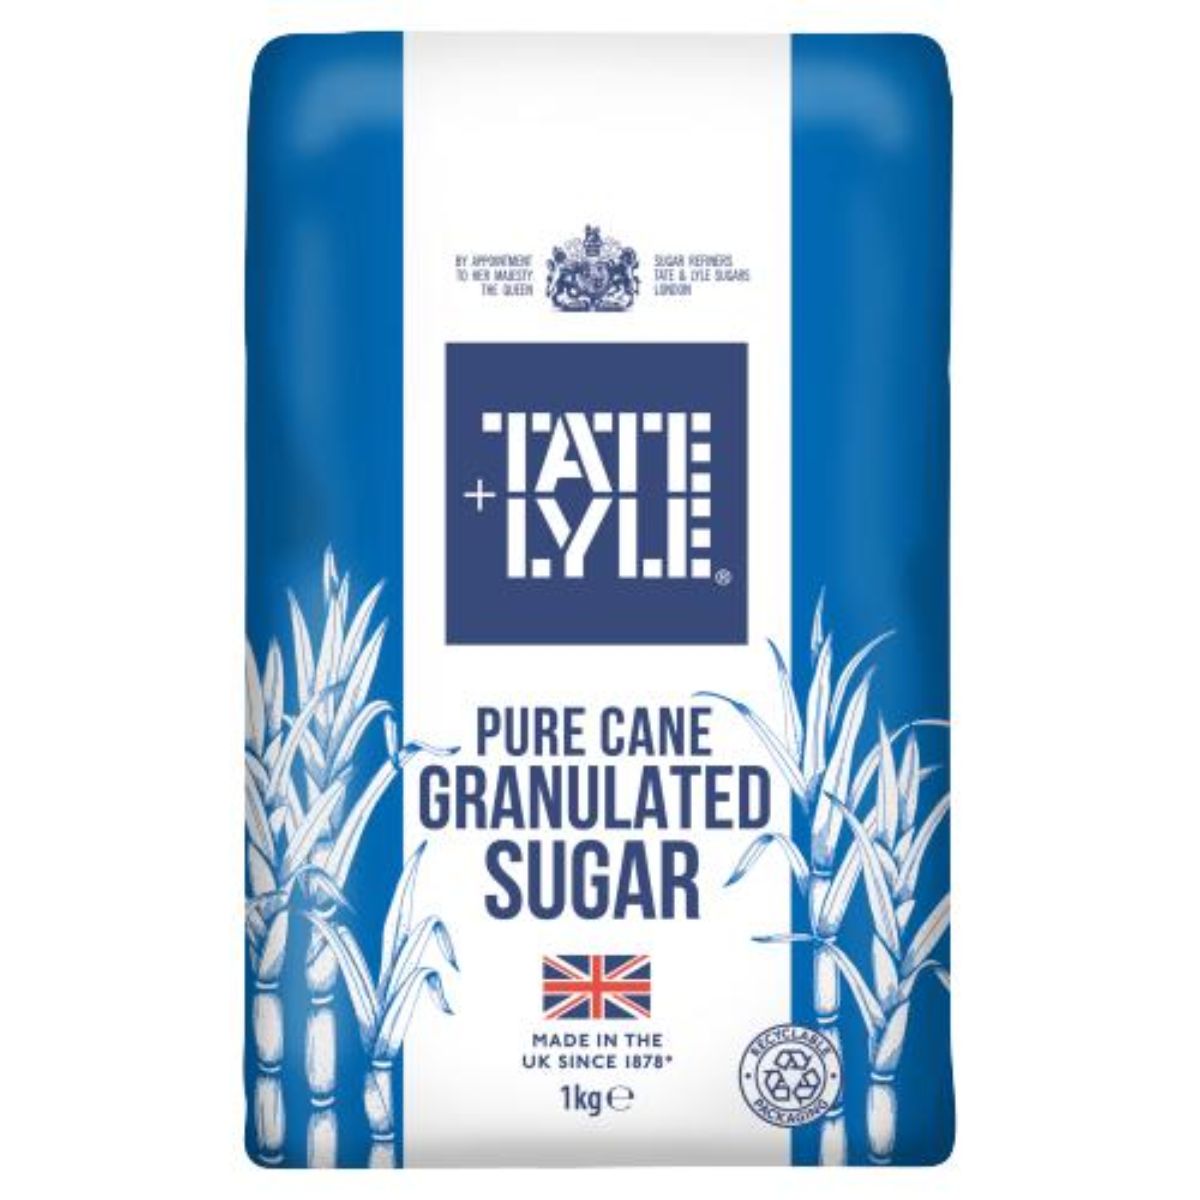 Blue and white packaged Tate & Lyle - Granulated Sugar - 1kg bag, made in the UK.